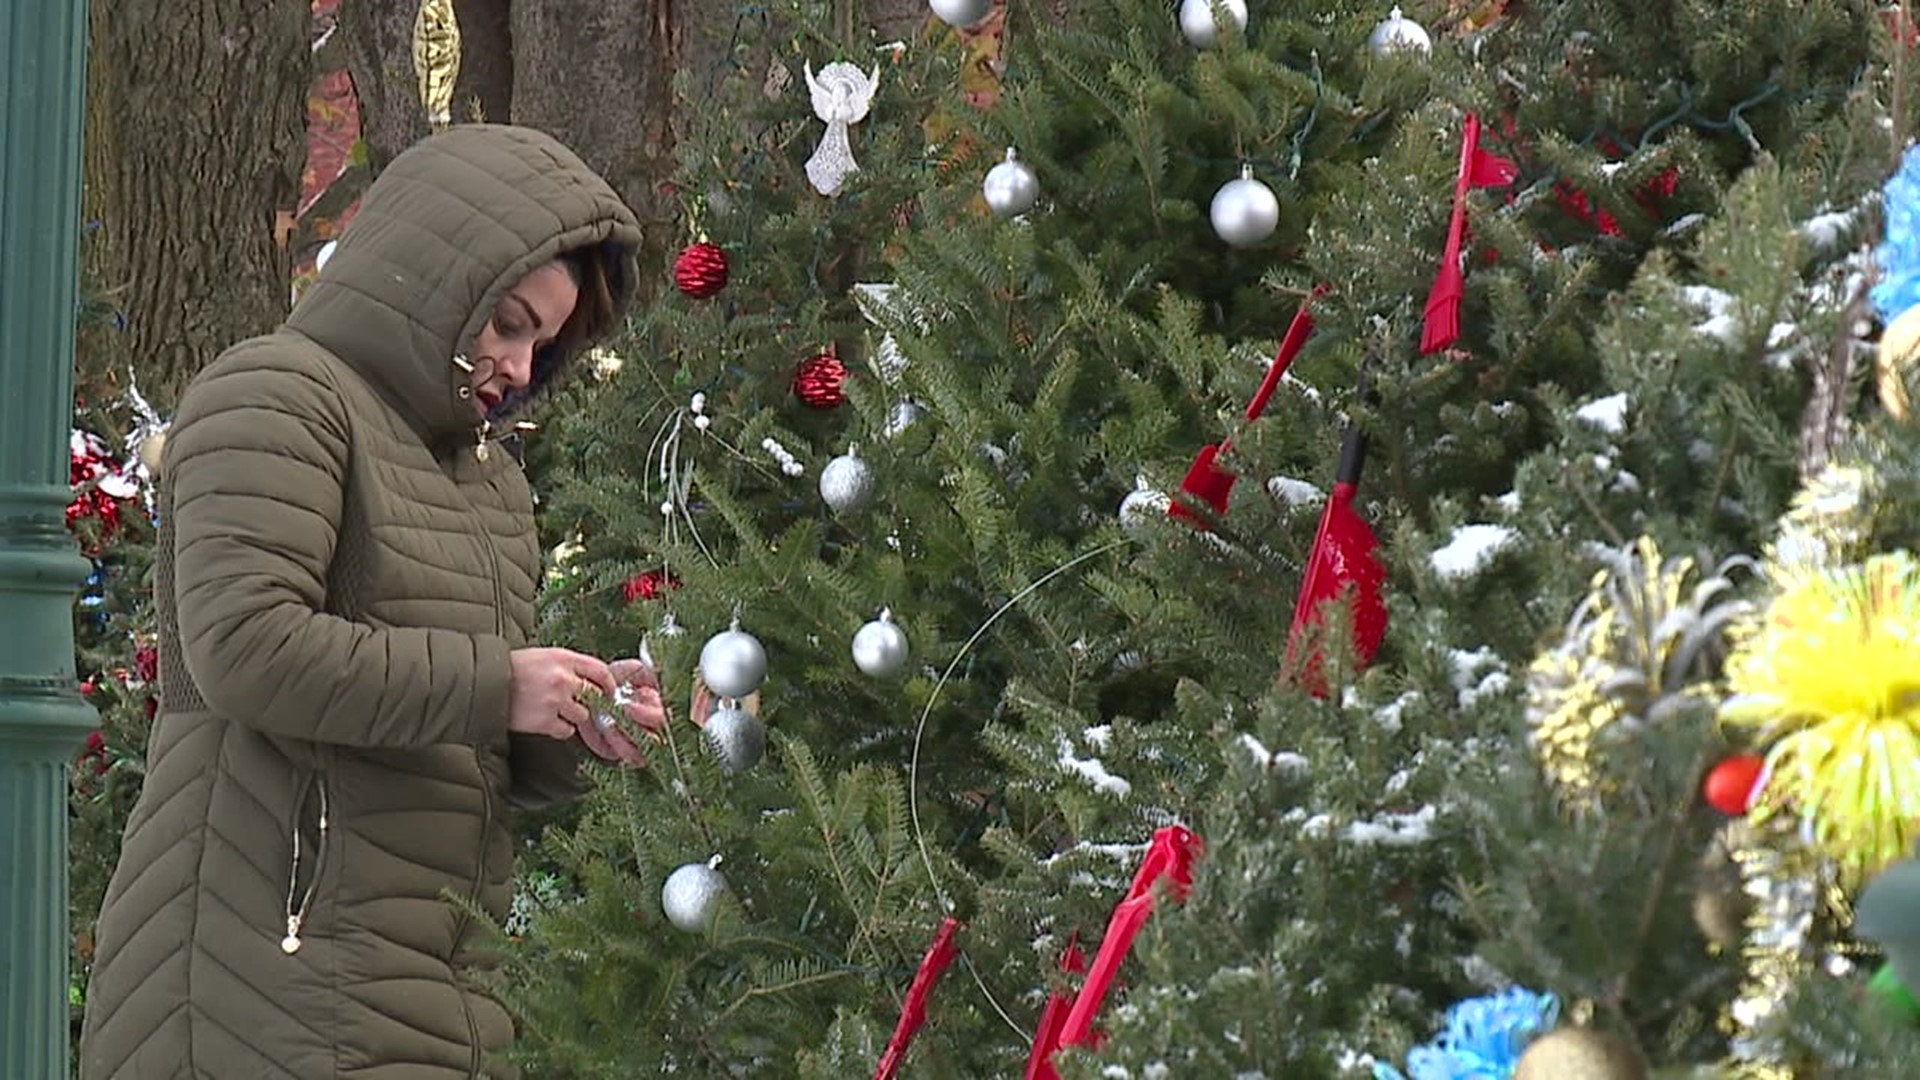 When it comes to decorating Carbondale for Christmas, it's a community effort.